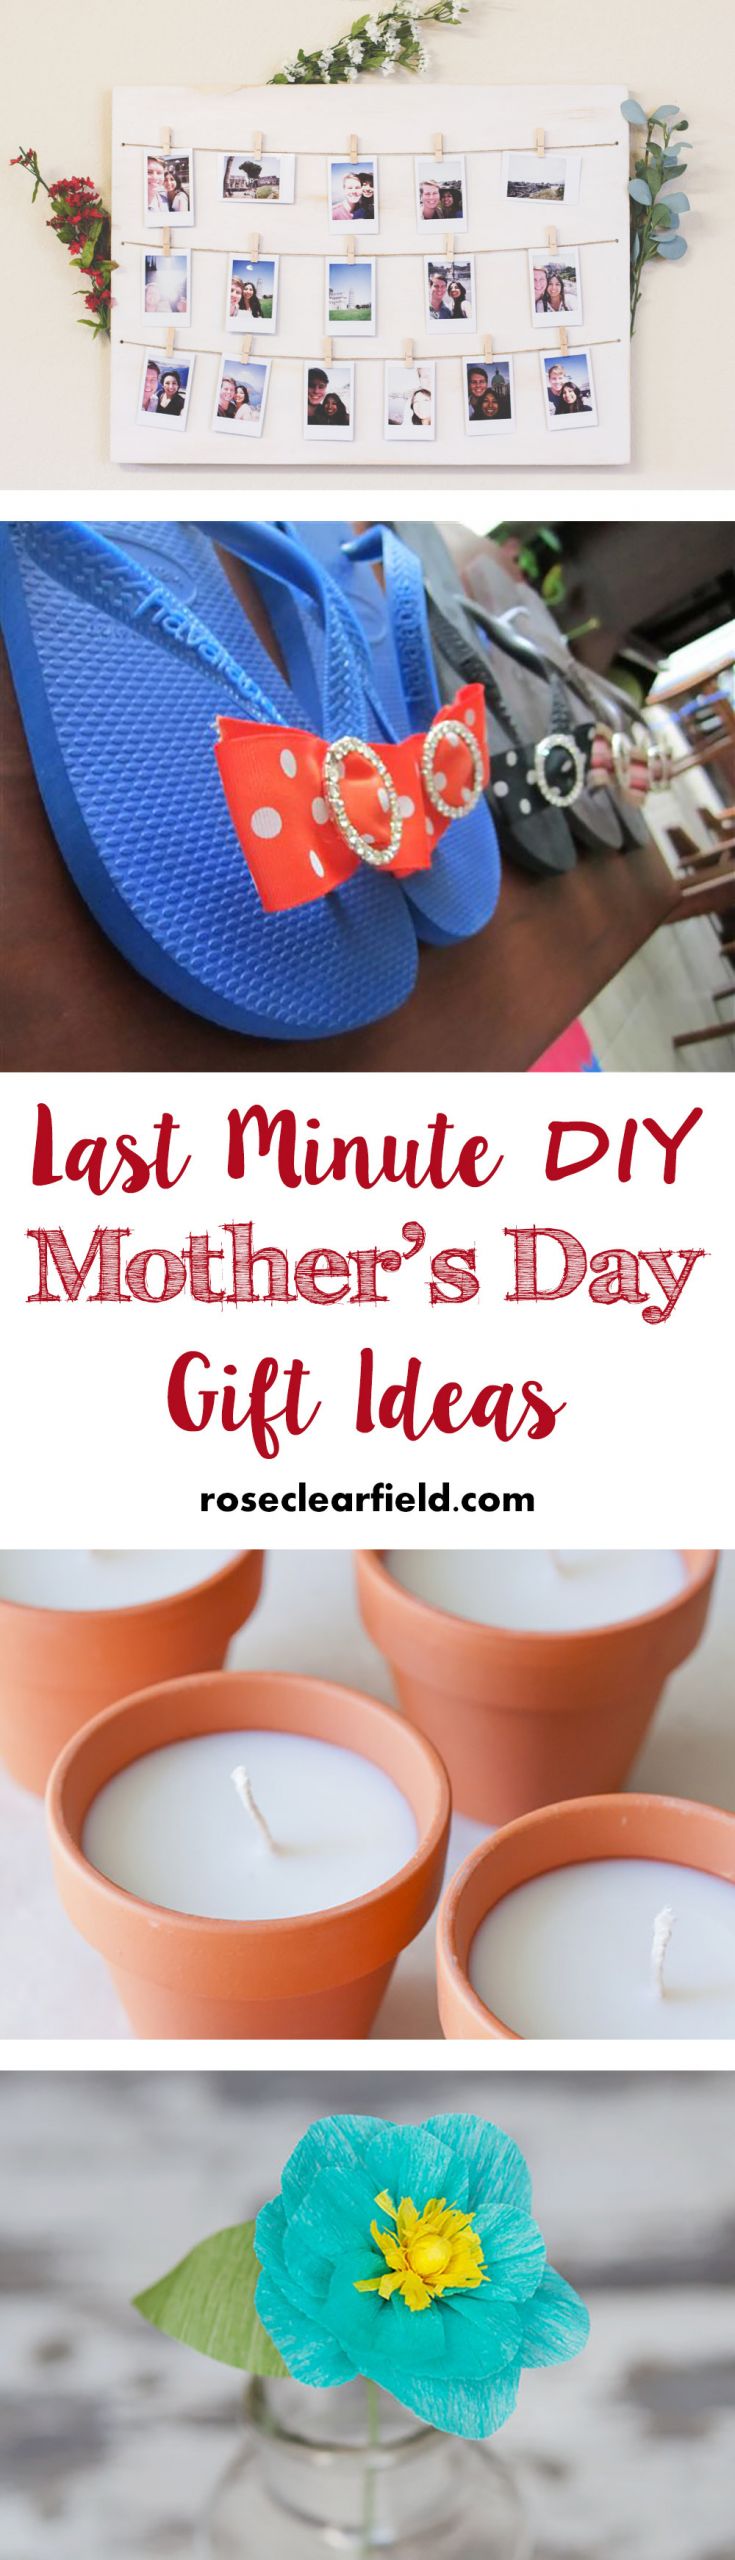 Last Minute Mother'S Day Gift Ideas Homemade
 Last Minute DIY Mother s Day Gift Ideas • Rose Clearfield